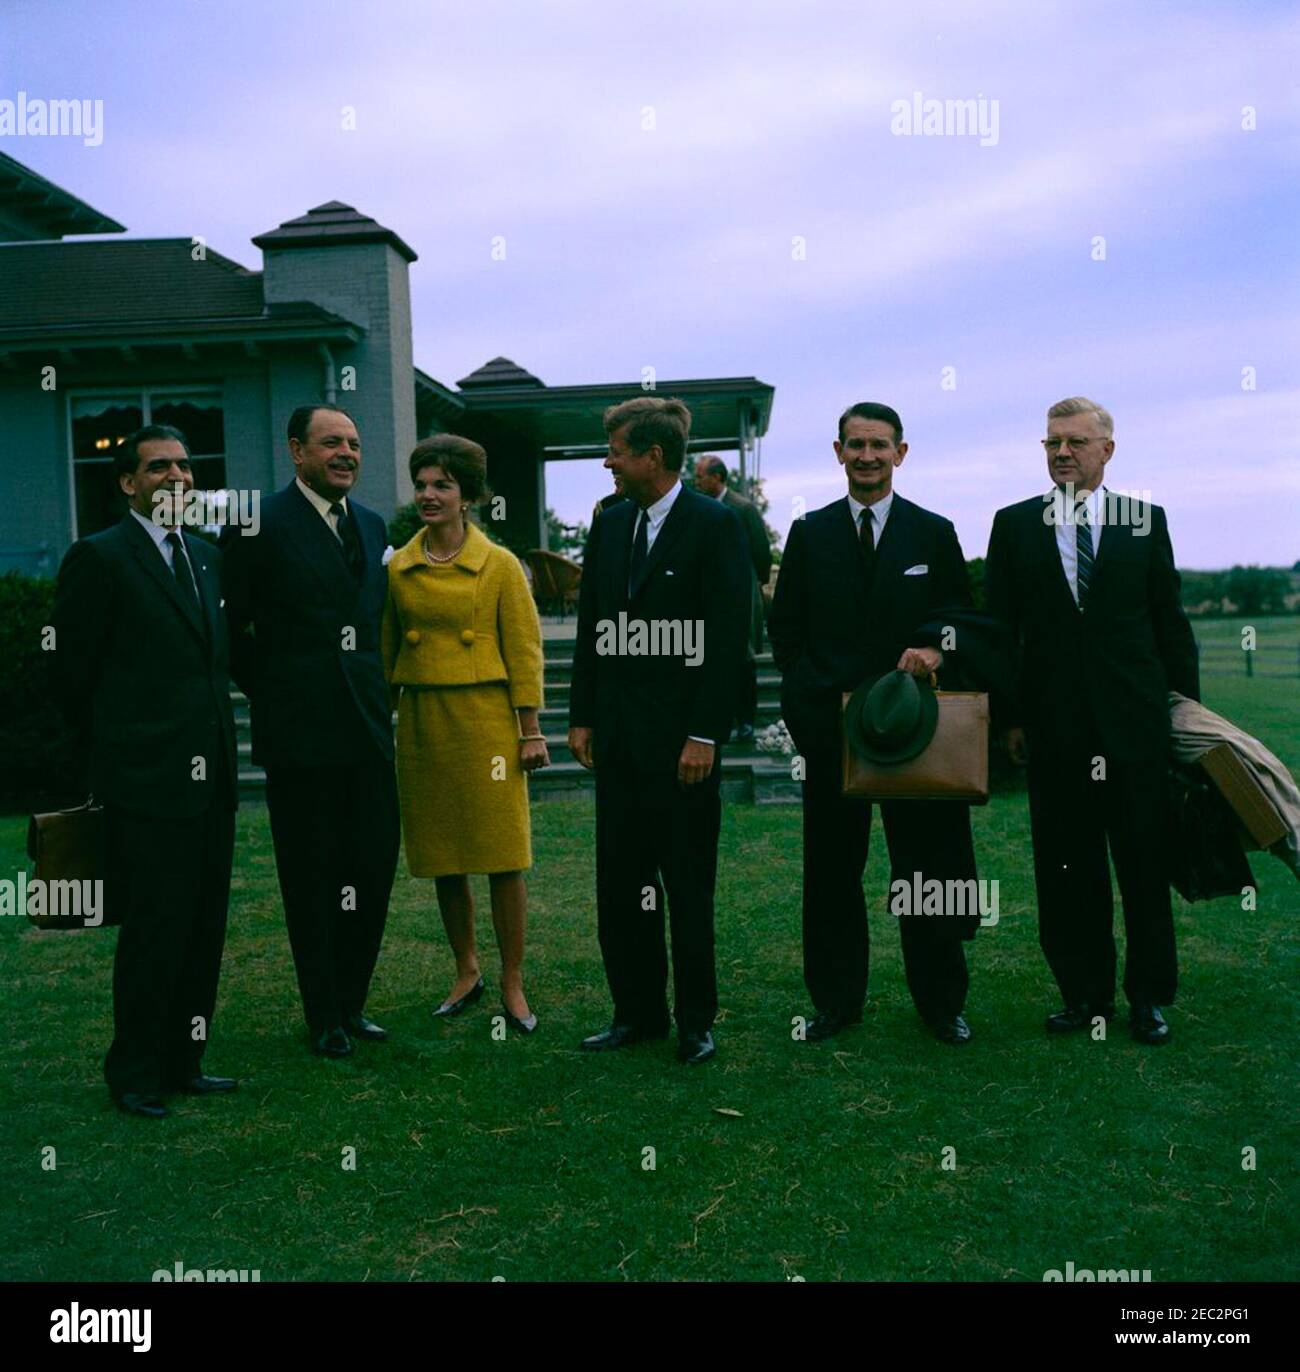 Visit of Muhammad Ayub Khan, President of Pakistan, Newport, Rhode Island. President John F. Kennedy and First Lady Jacqueline Kennedy visit with President of Pakistan, Muhammad Ayub Khan, at Hammersmith Farm in Newport, Rhode Island. Left to right (in foreground): Ambassador of Pakistan, Aziz Ahmed; President Ayub Khan; Mrs. Kennedy; President Kennedy; U.S. Ambassador to Pakistan, Walter P. McConaughy; U.S. Assistant Secretary of State for Near Eastern and South Asian Affairs, Phillips Talbot. U.S. Chief of Protocol, Angier Biddle Duke (partially hidden), stands in background. Stock Photo